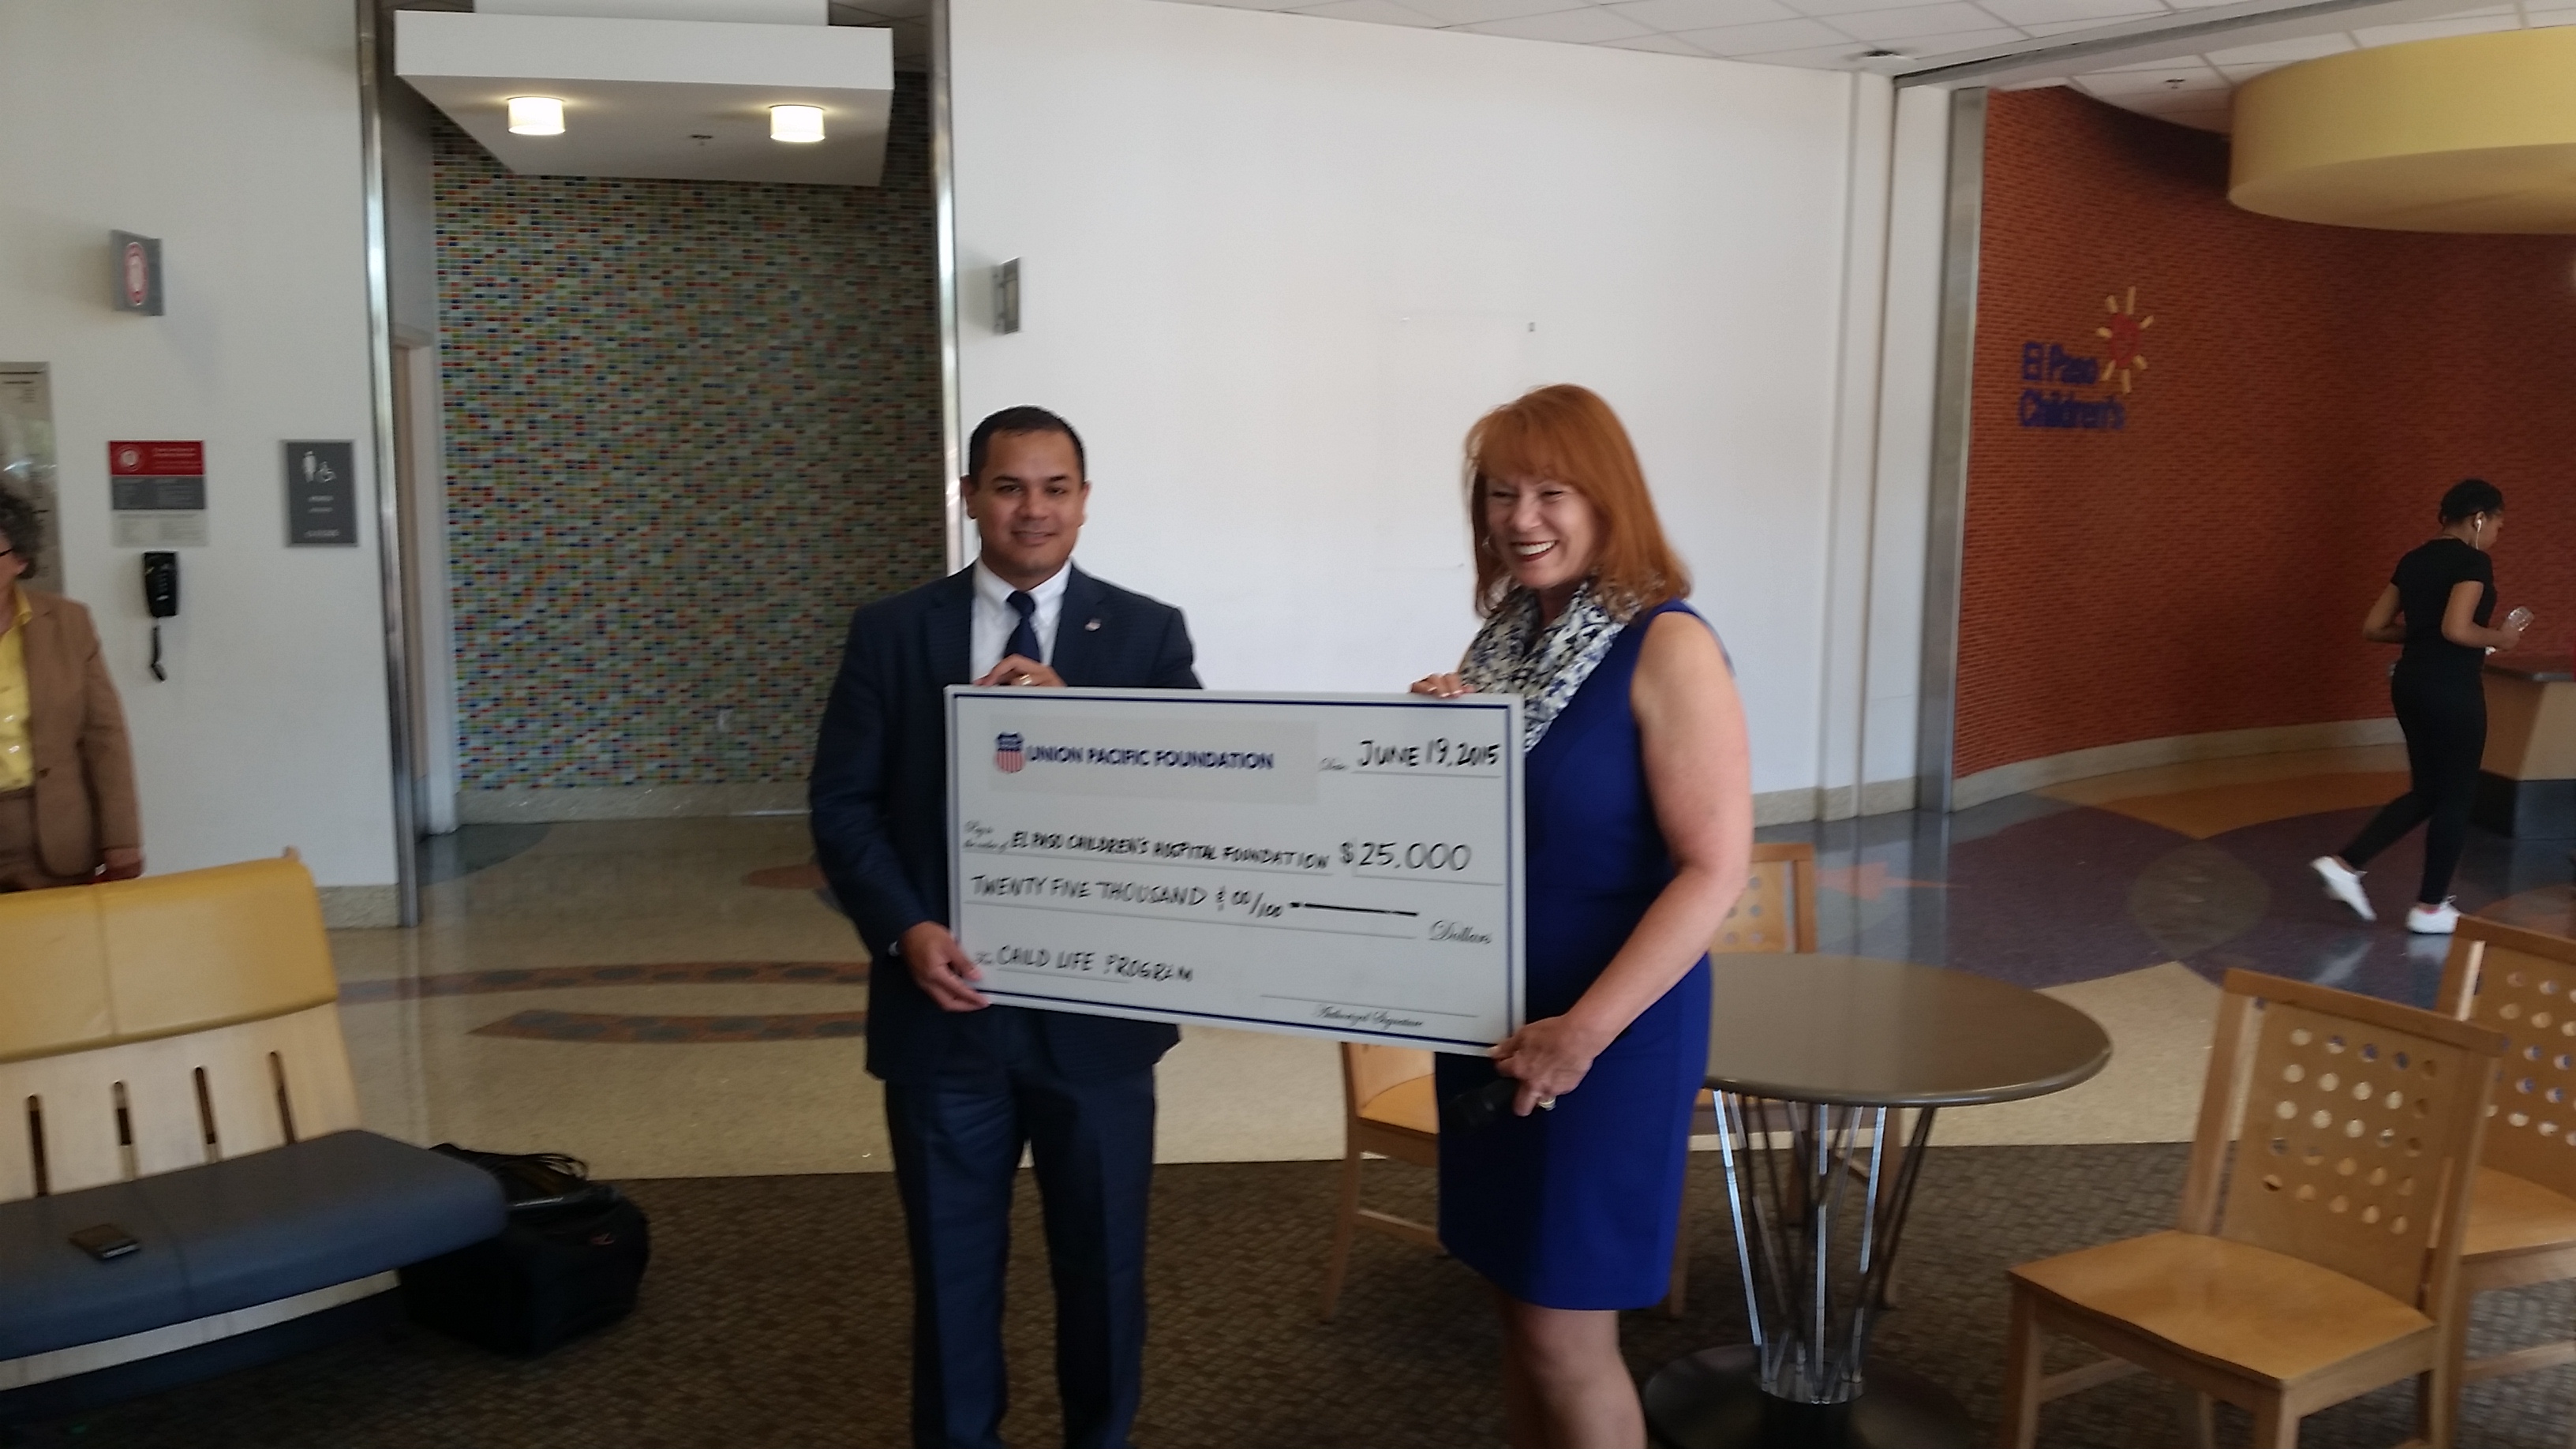 Union Pacific presents $25,000 to EPCH Foundation